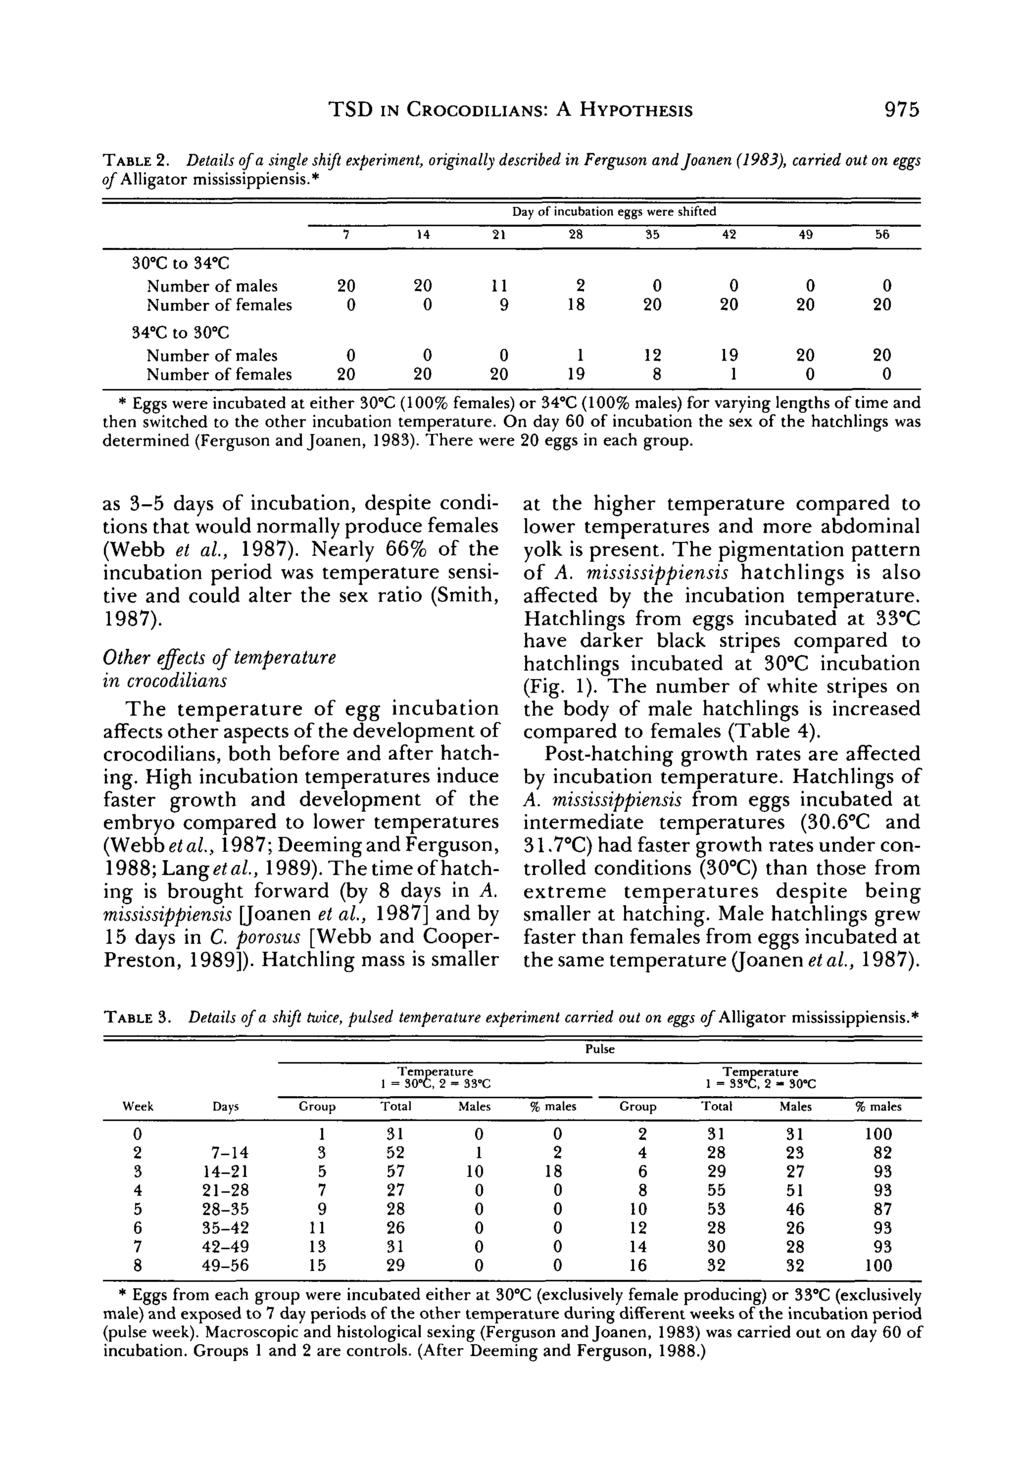 TSD IN CROCODILIANS: A HYPOTHESIS 975 TABLE 2. Details of a single shift experiment, originally described in Ferguson and Joanen (1983), carried out on eggs of Alligator mississippiensis.